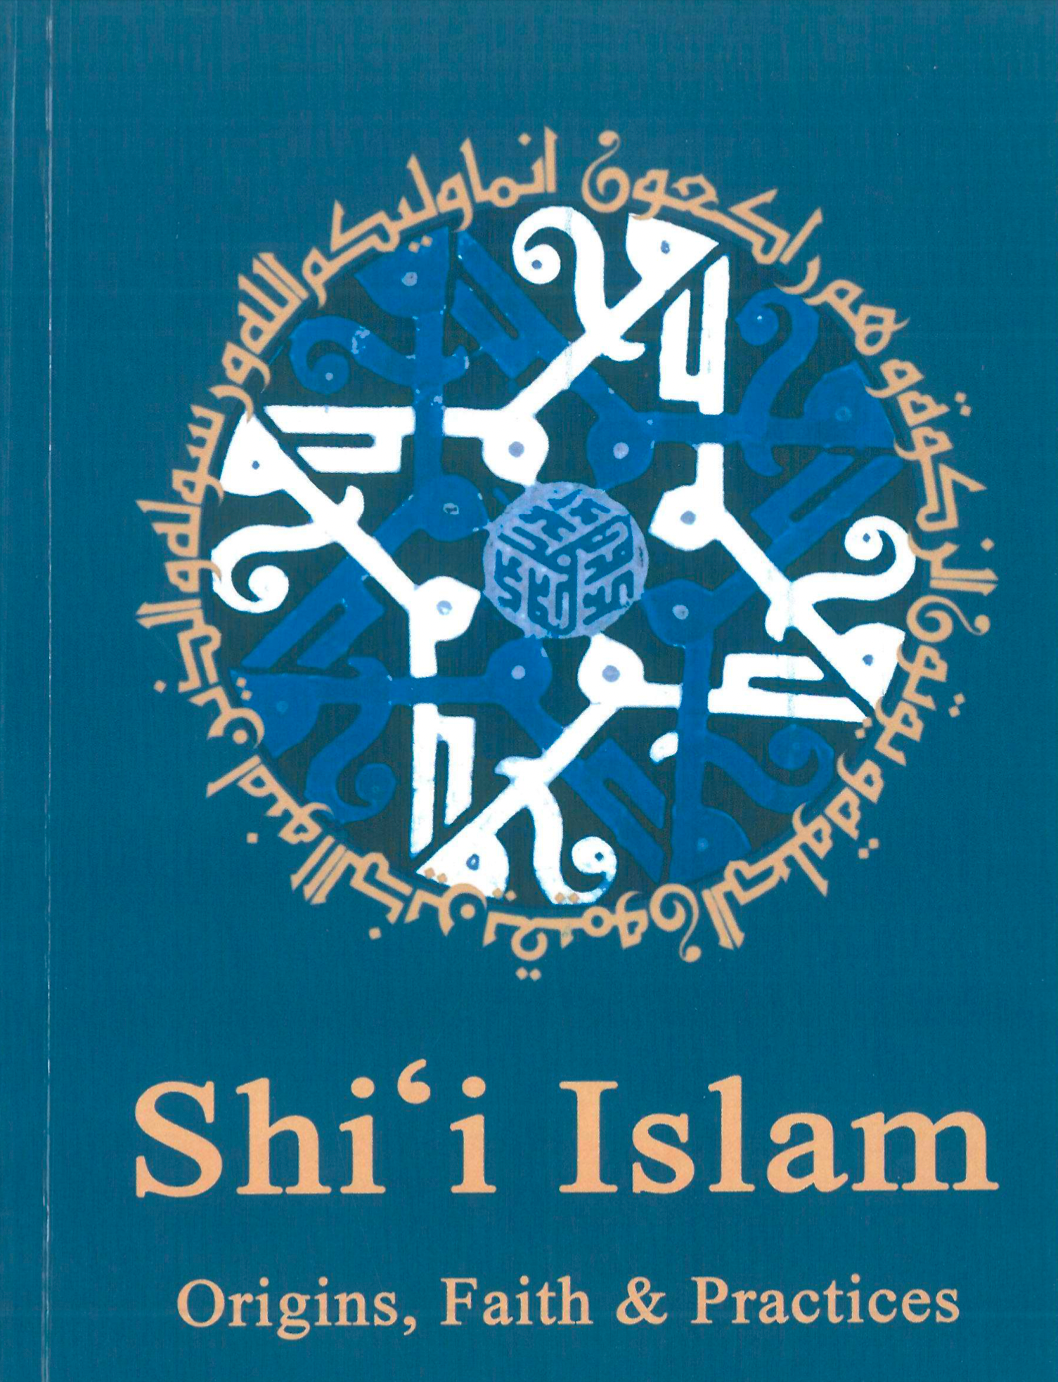 Shi‘i Islam: Origins, Faith and Practices by Dr Mohammad A. Shomali (London: Islamic College for Advanced Studies, 2003 & 2010)